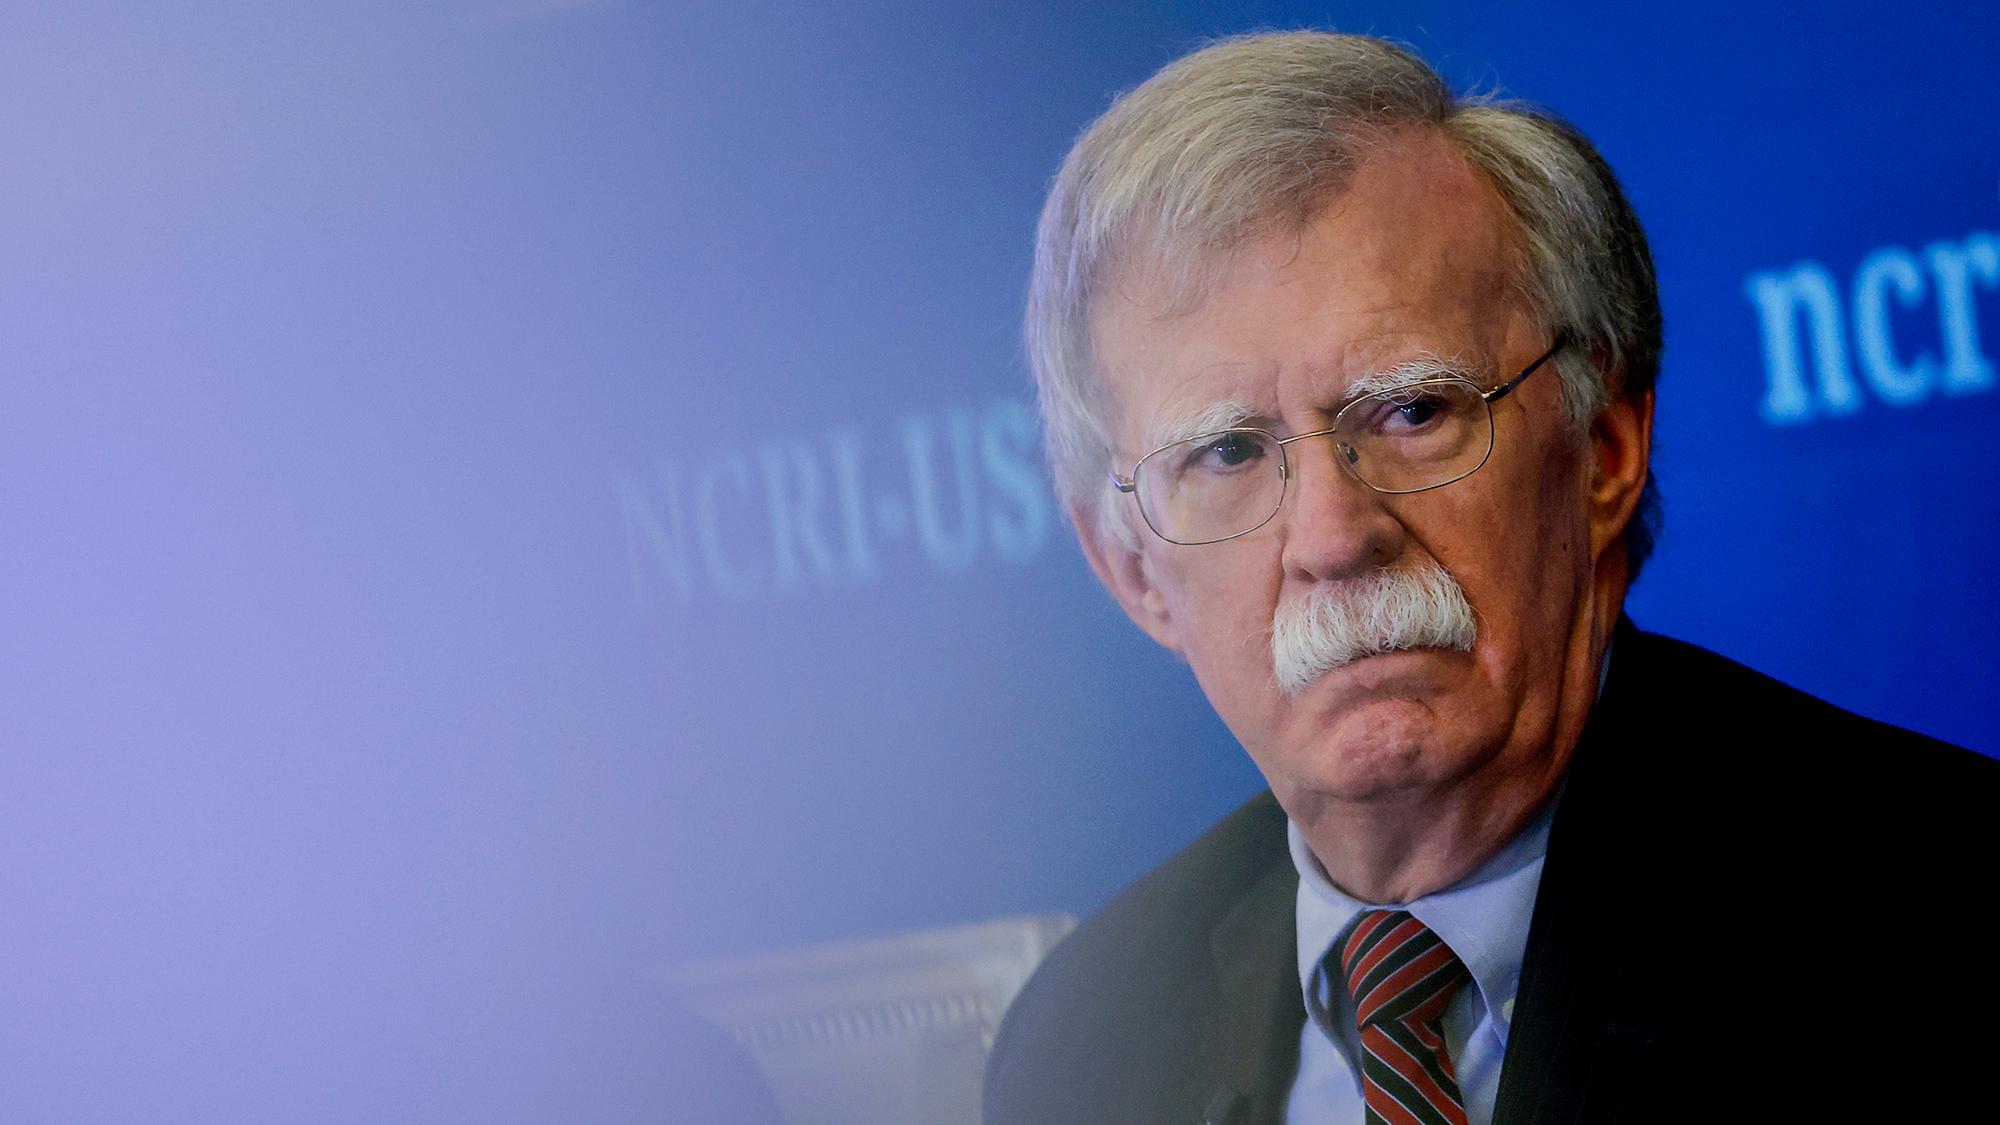 In this August 2022 photo, former National Security Adviser John Bolton speaks at a panel hosted by the National Council of Resistance of Iran – U.S. Representative Office (NCRI-US) at the Willard InterContinental Hotel in Washington, DC.